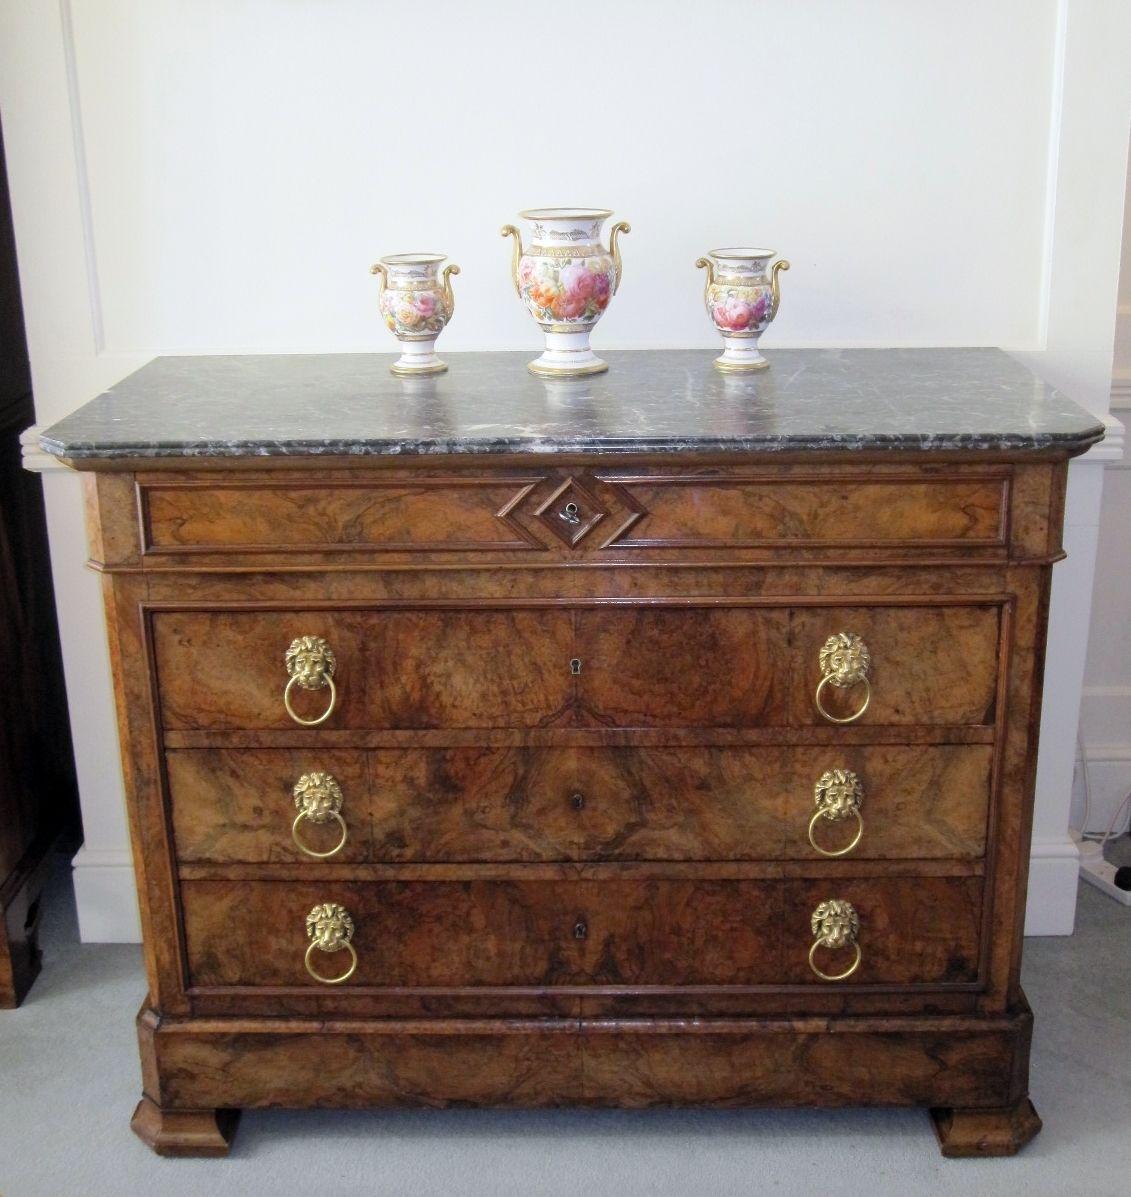 EARLY 19TH CENTURY FRENCH WALNUT COMMODE